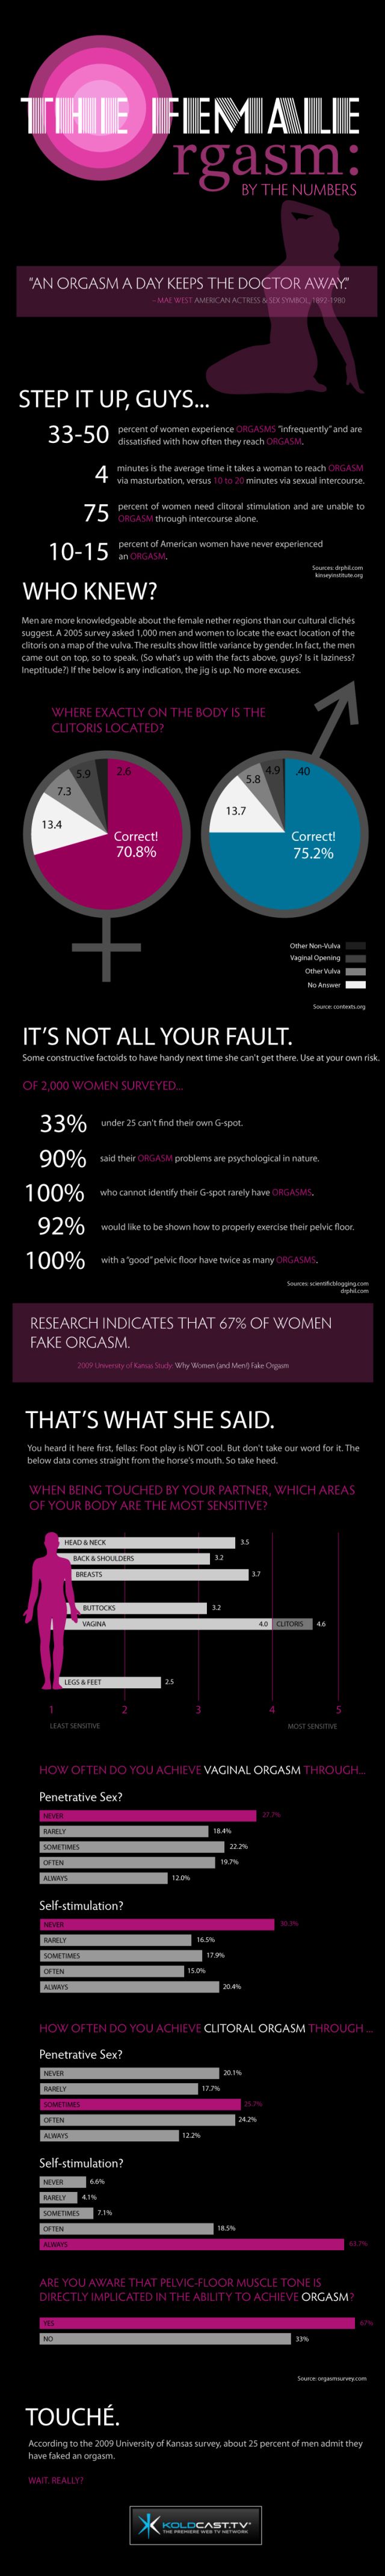 The Female Orgasm: by the Numbers